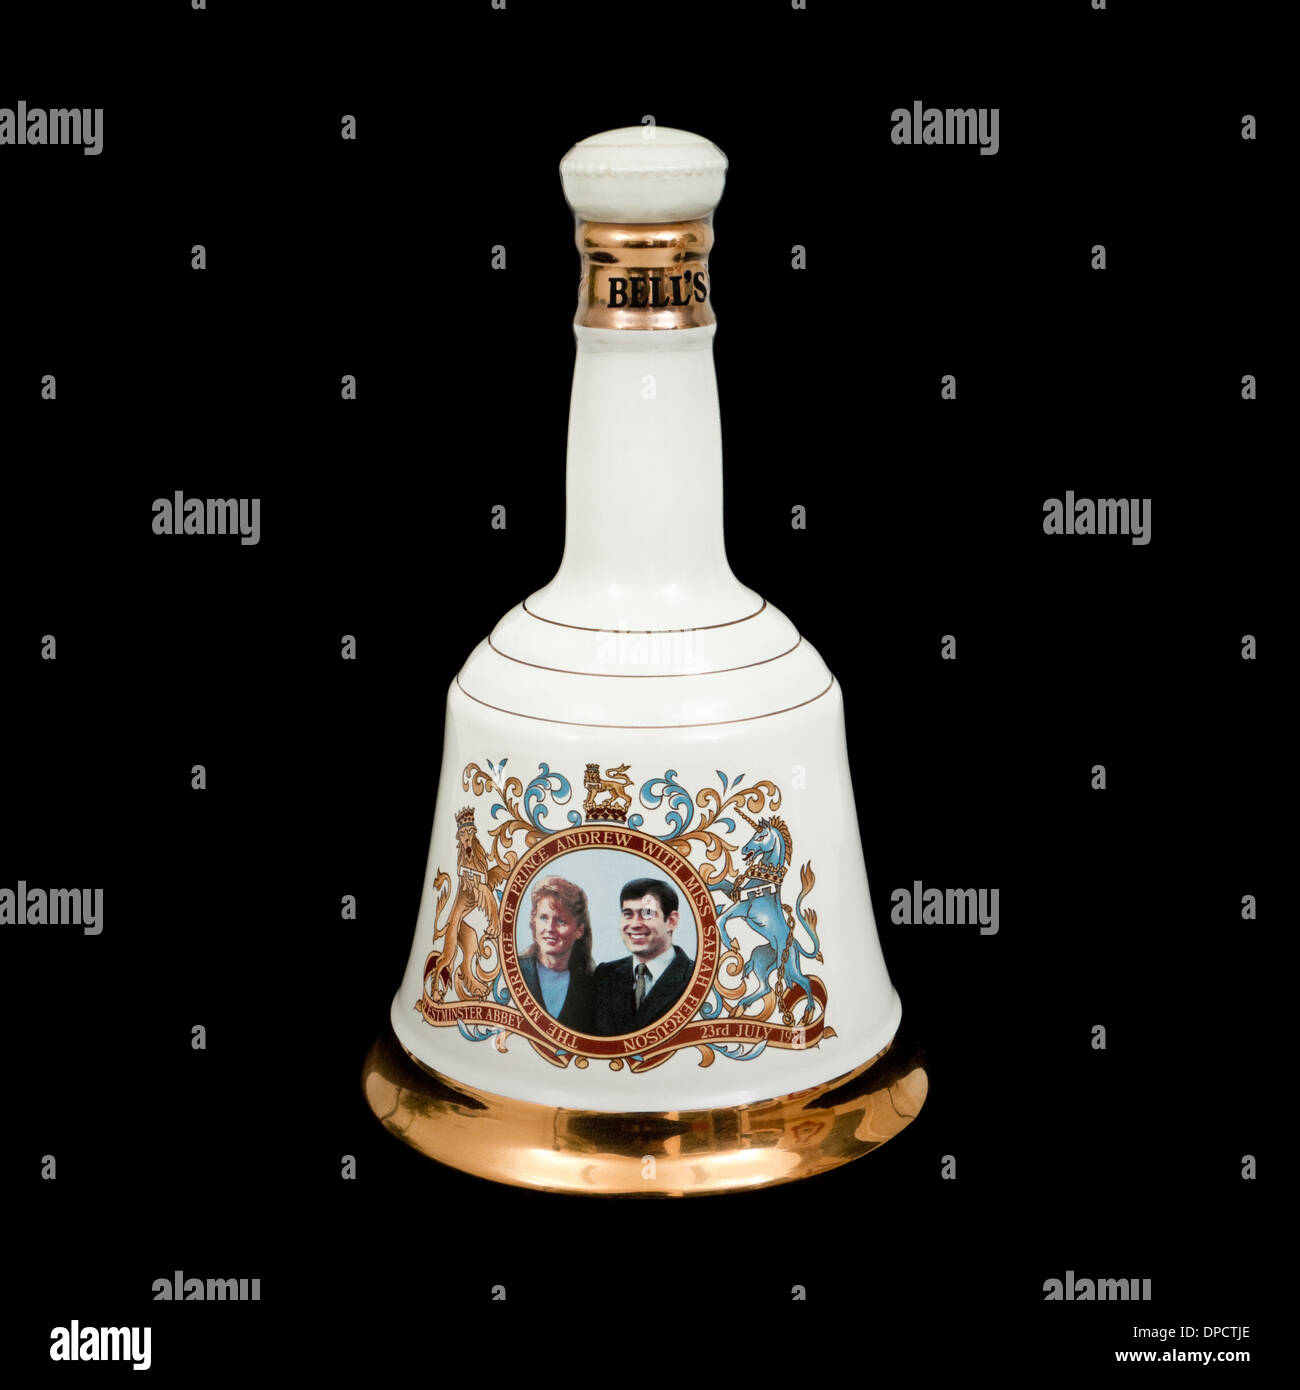 Bell's Scotch Whisky porcelain decanter made by Wade, commemorating the Marriage of HRH Prince Andrew and Miss Sarah Ferguson Stock Photo